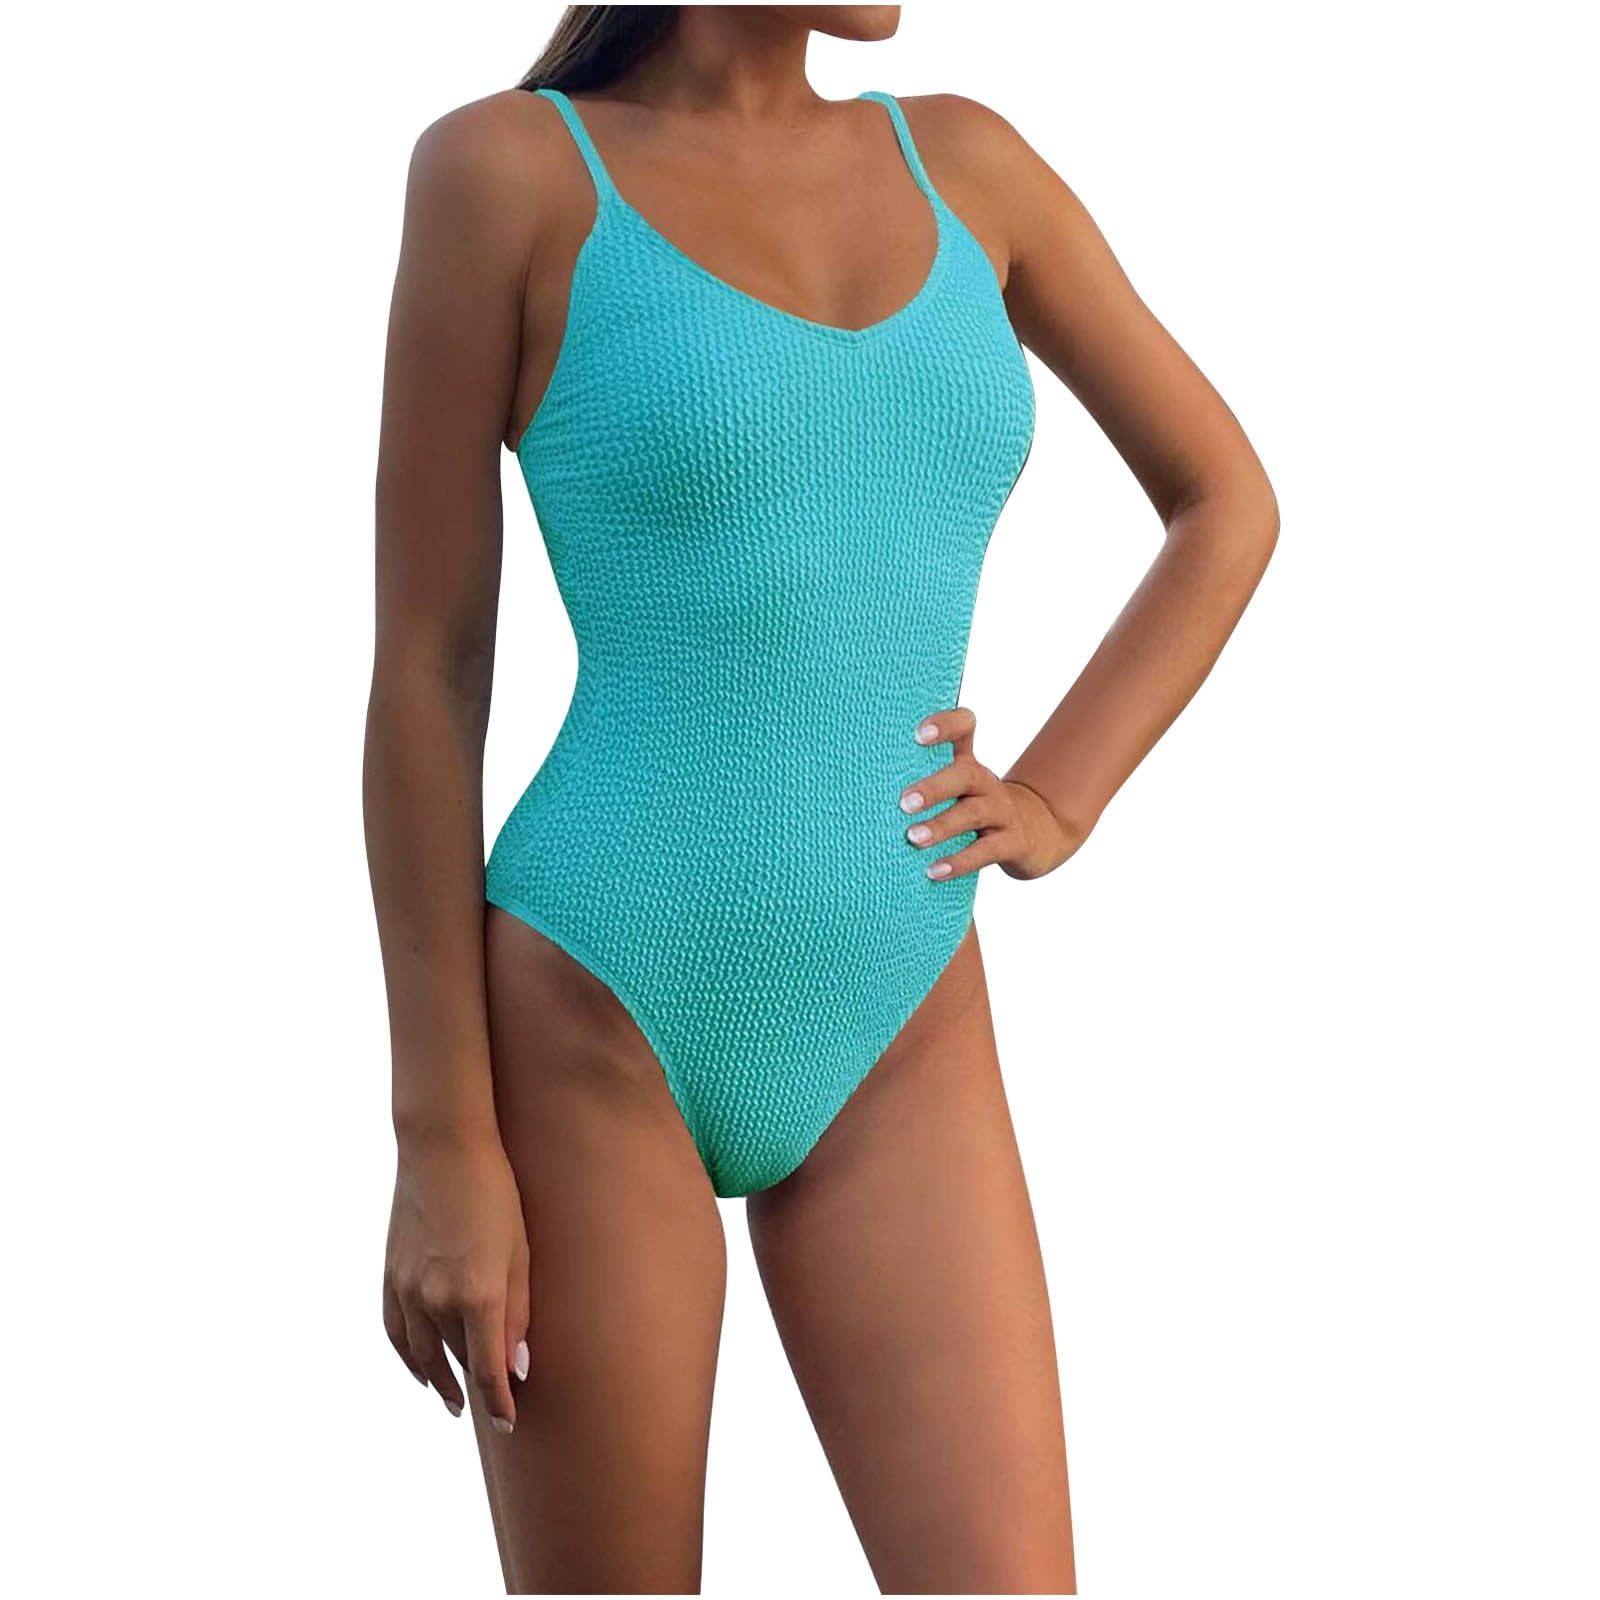 Jikolililili Women's 23 New Fashion Style With Bra Pad, No Steel Support,  Multi-color New Fashion One-piece Swimsuit, Sexy Solid Color Swimsuit